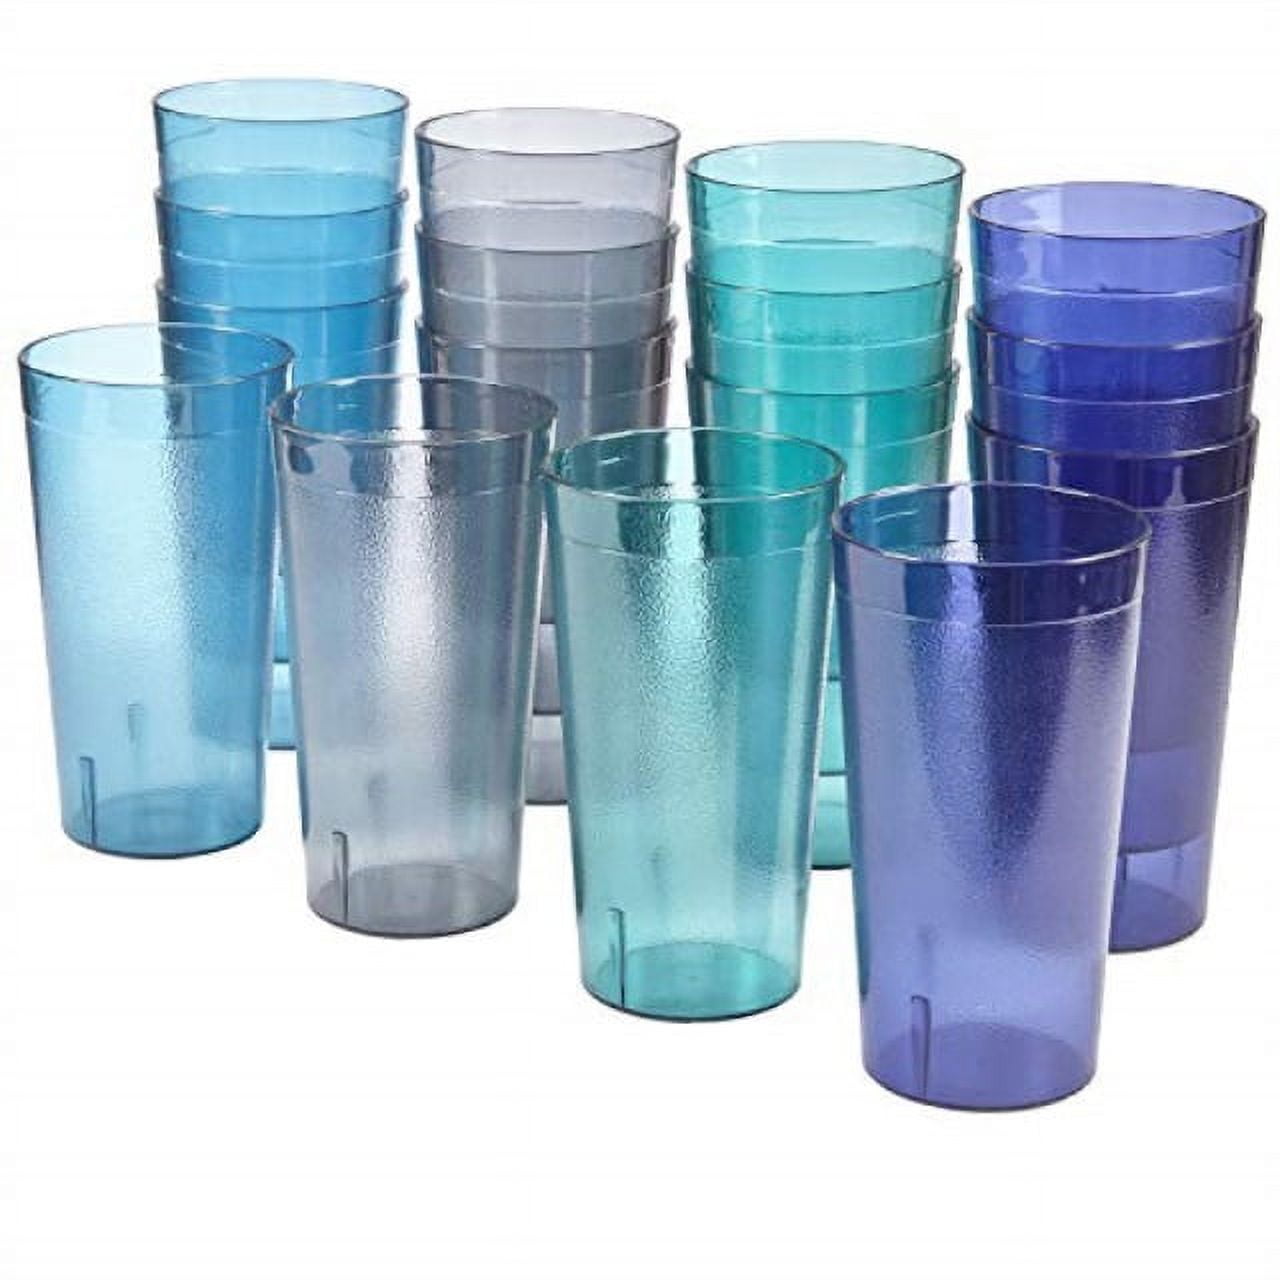 32-ounce Plastic Restaurant-style Tumblers Set of 12 in 4 Assorted Colors 